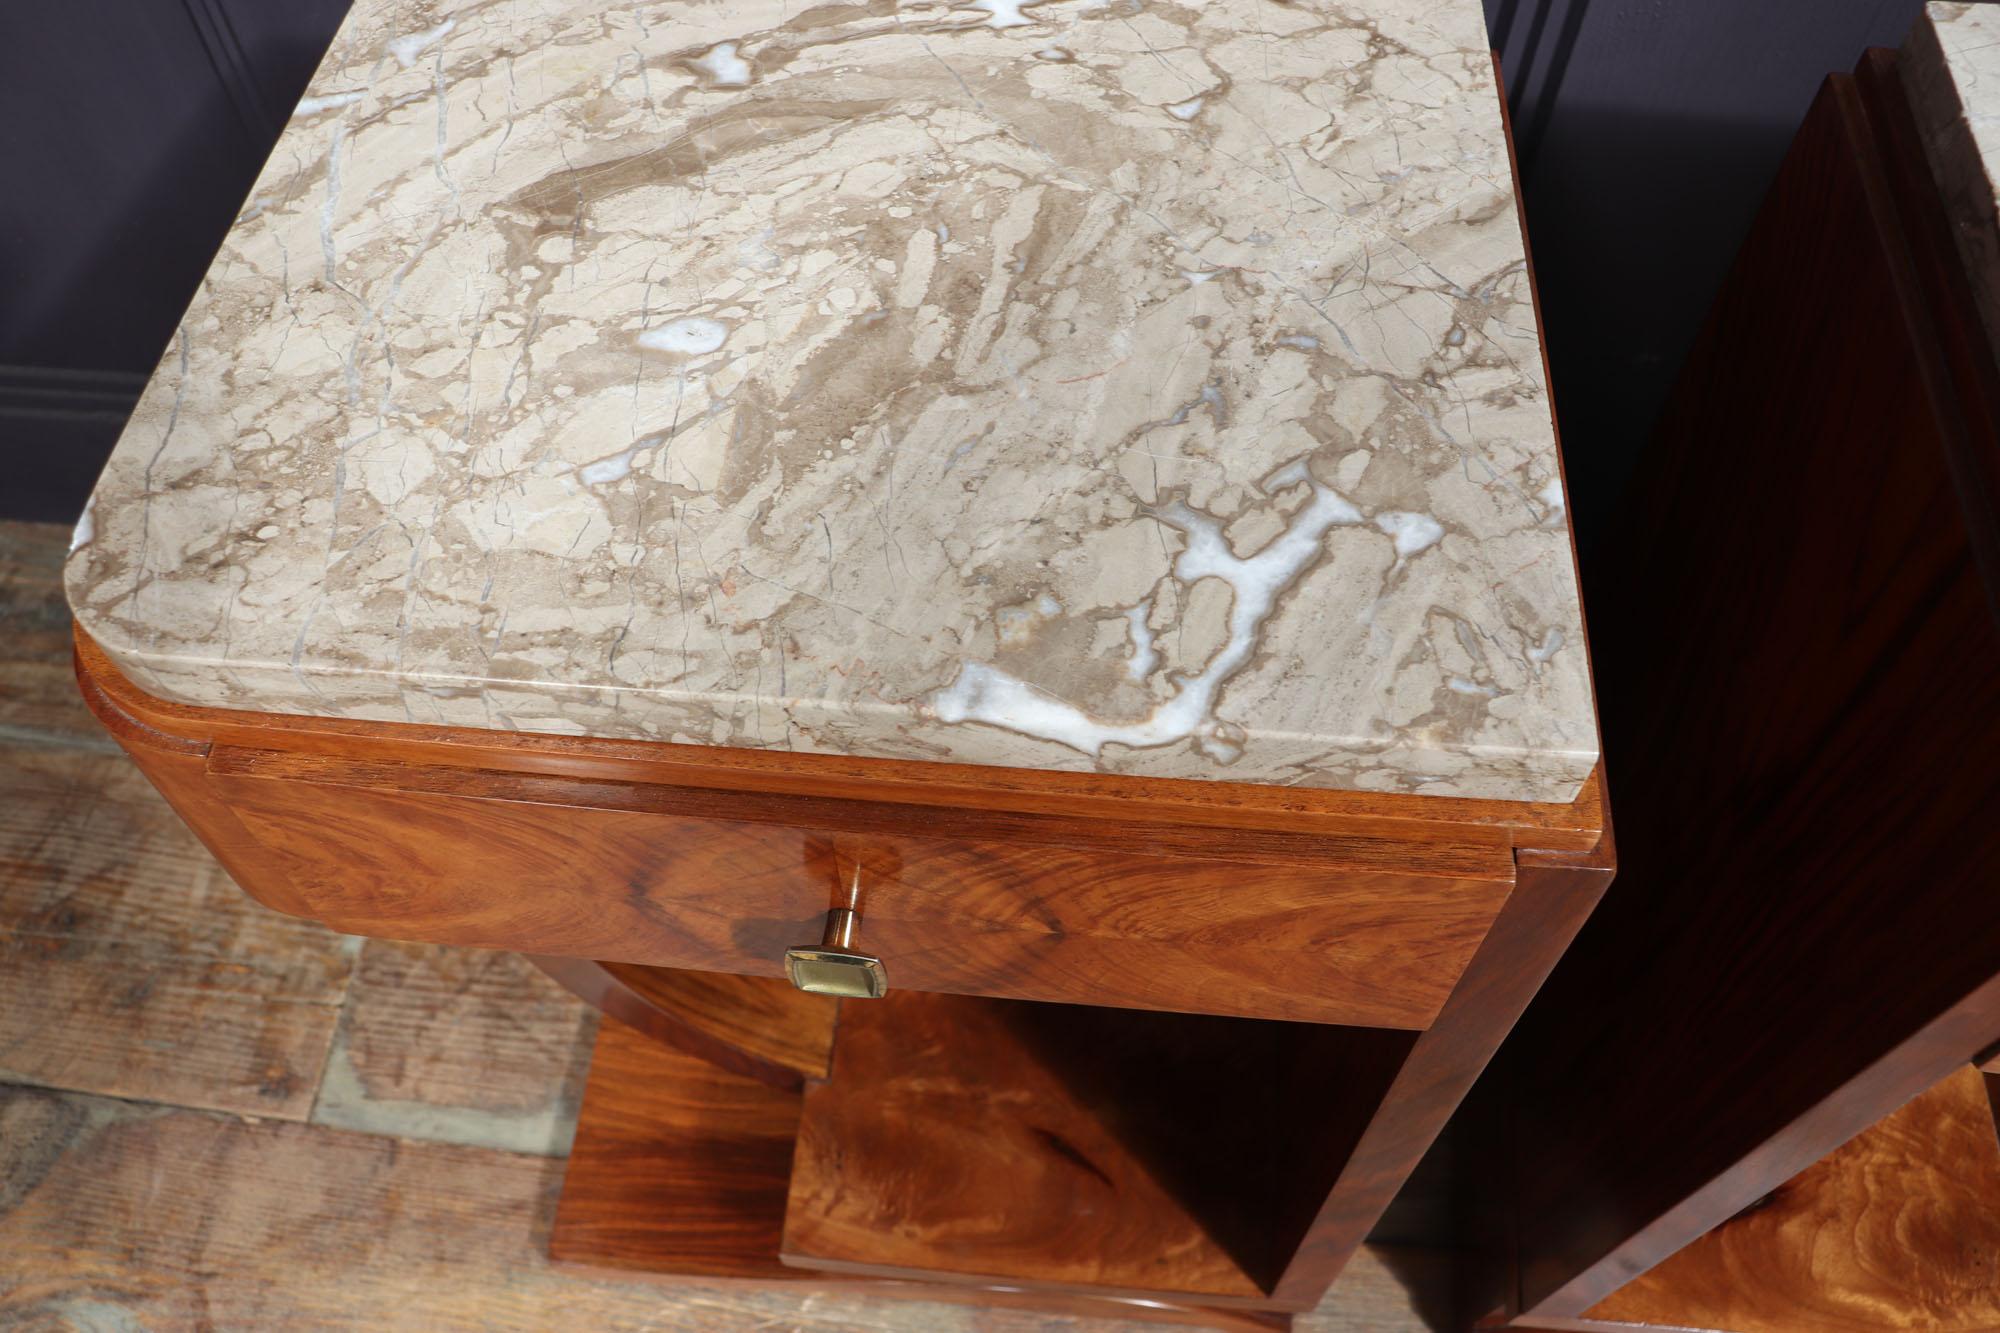 Art Deco bedside tables
Pair of beautiful French Art Deco walnut bedside tables, having geometric form with half u shape to one side, single drawer marble tops all standing on an ornate base as you can see the they are great quality and in